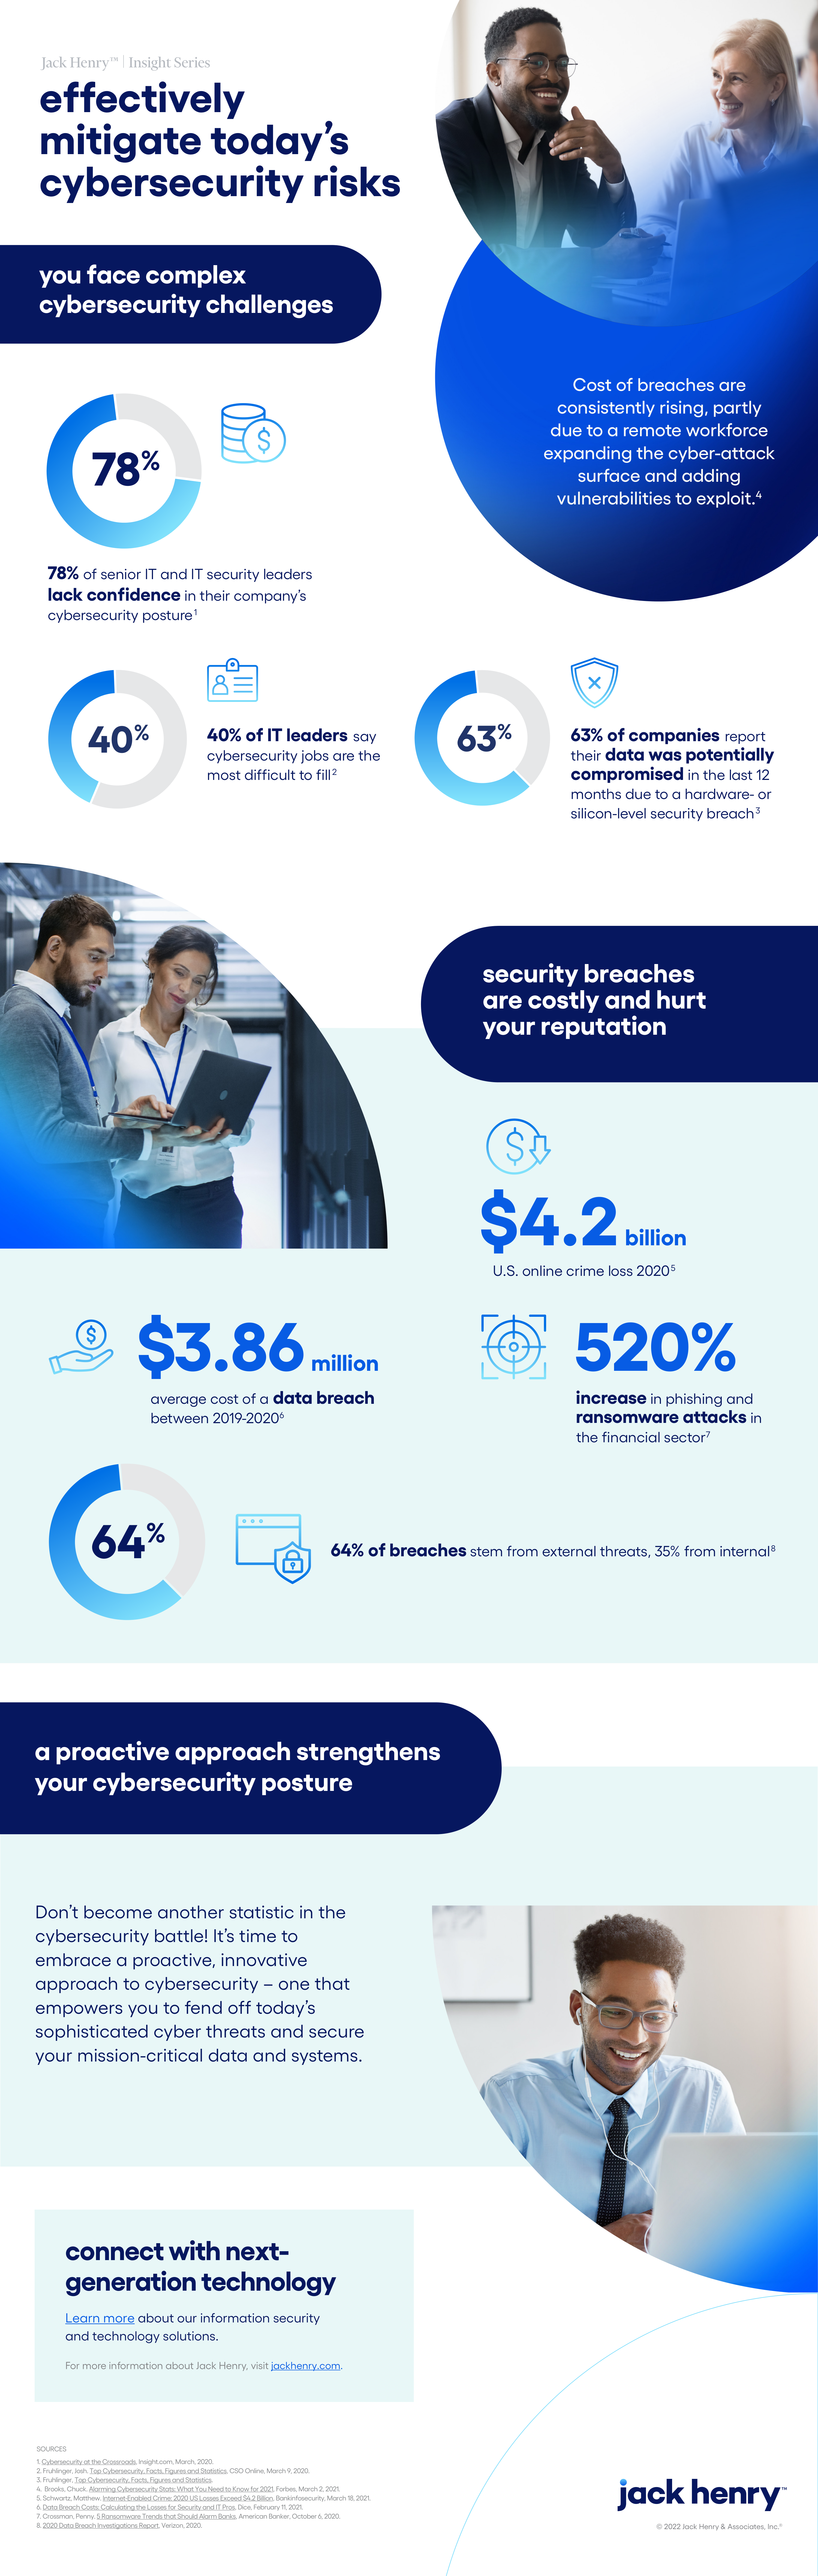 effectively mitigate today's cybersecurity risks infographic